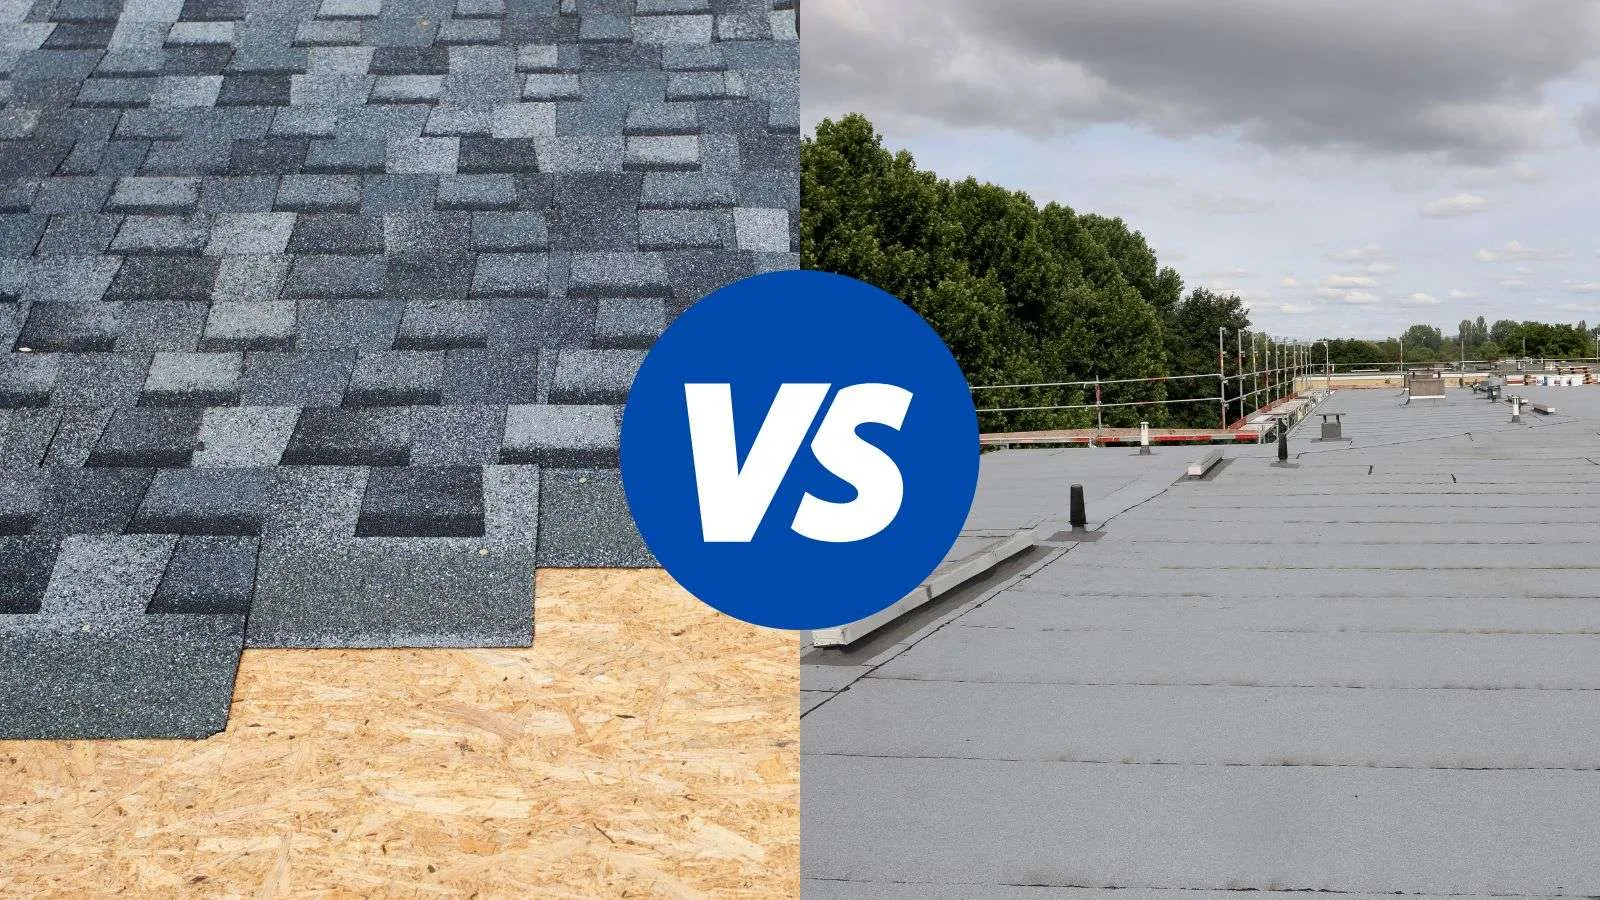 layered roofing systems vs single-ply systems - bighomeprojects.com